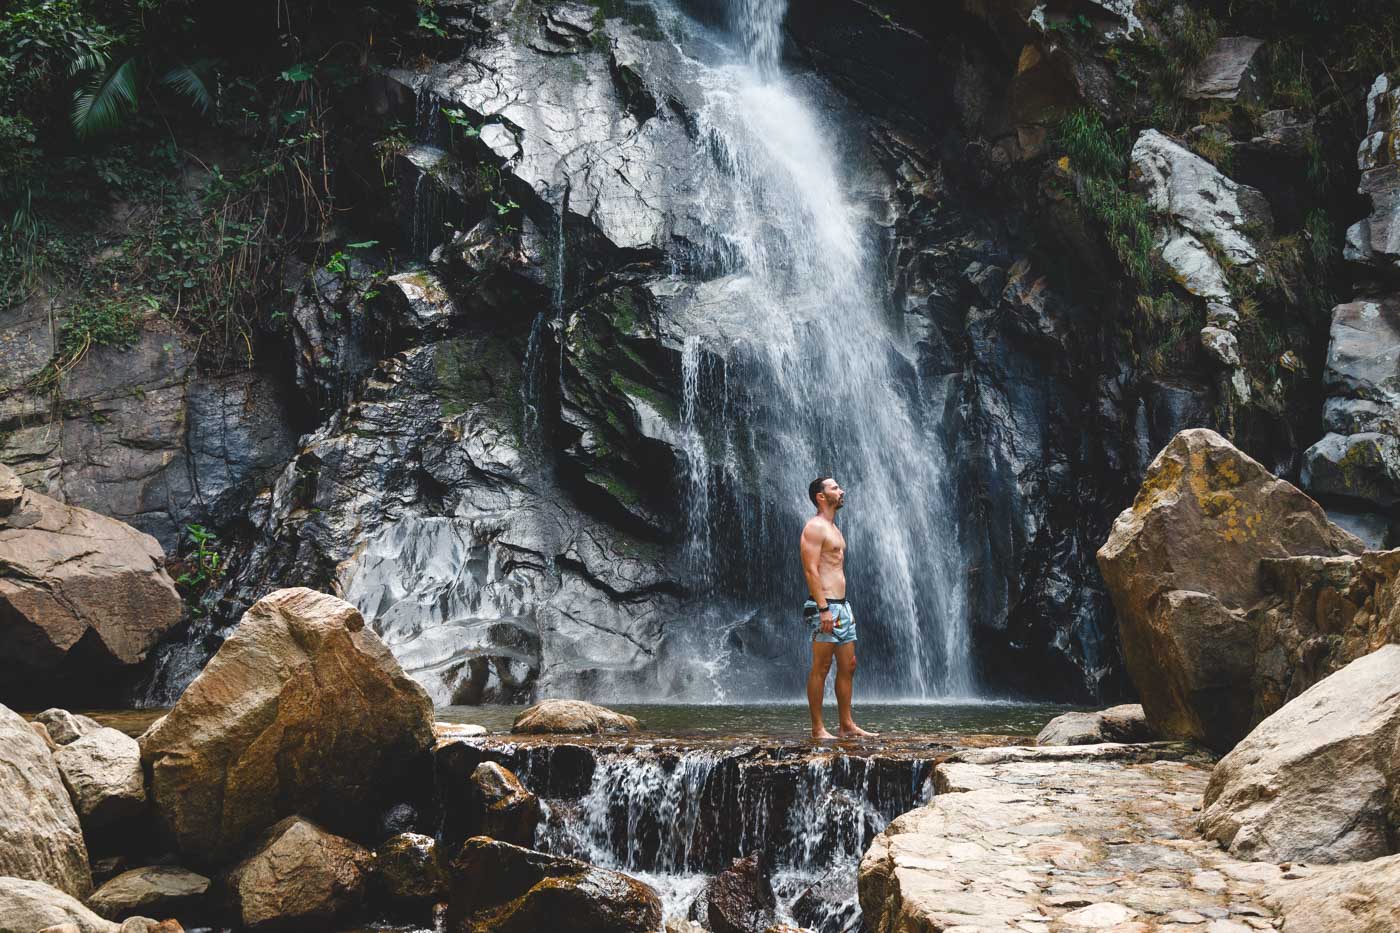 A man posing in front of Yelapa Waterfall in between rocks and the cliff.